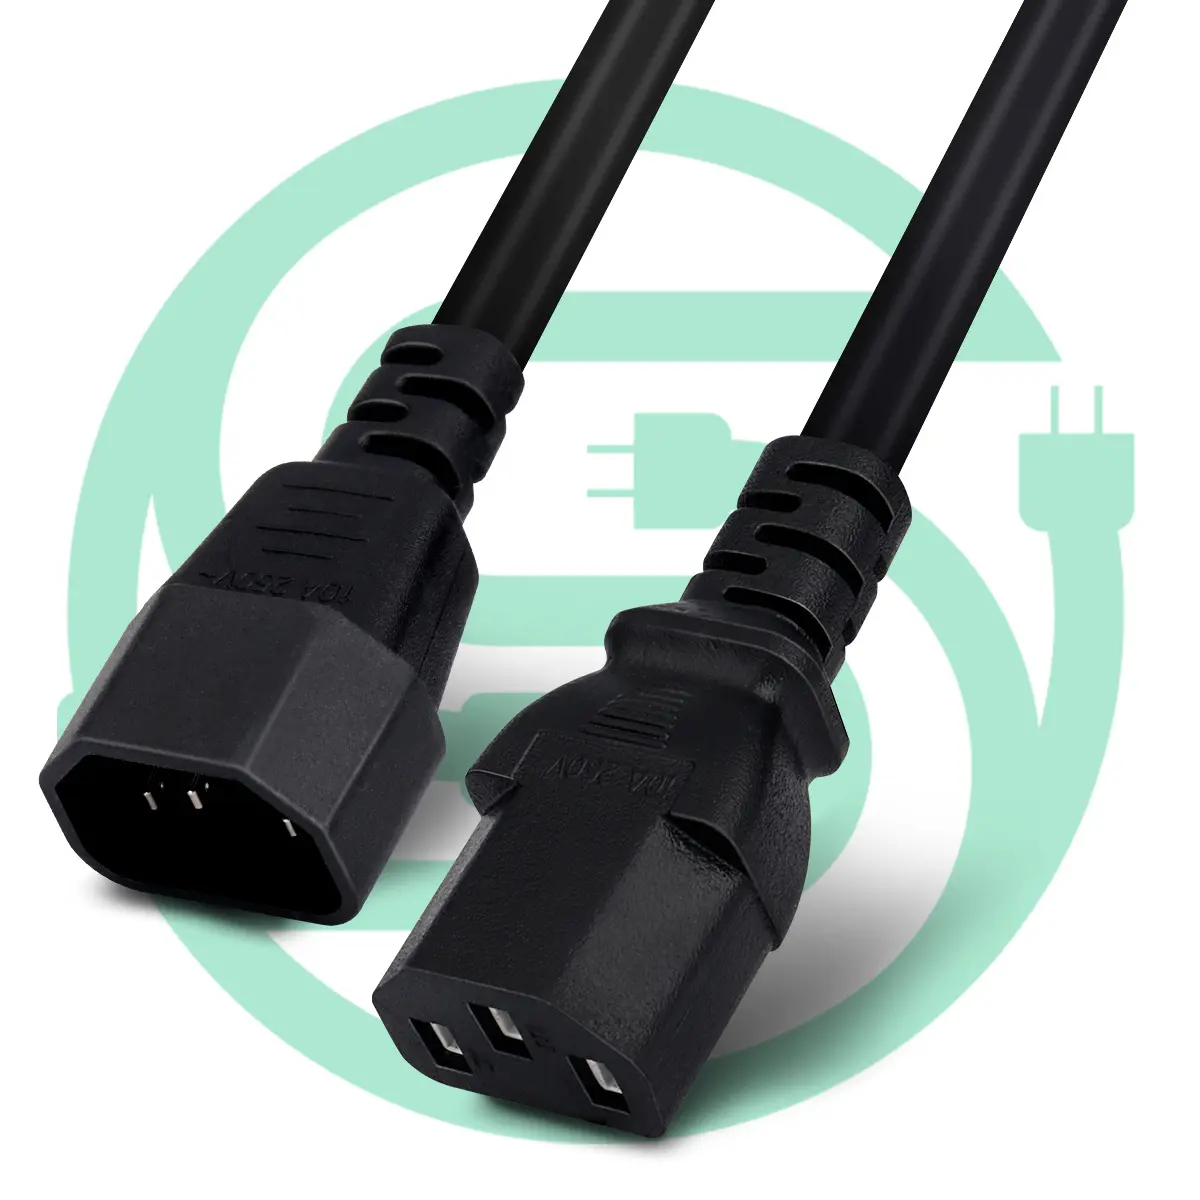 AC Power cord C13-C14 Male to Female Power Extension Cord Cable 13A / 250V 14/3 AWG Length